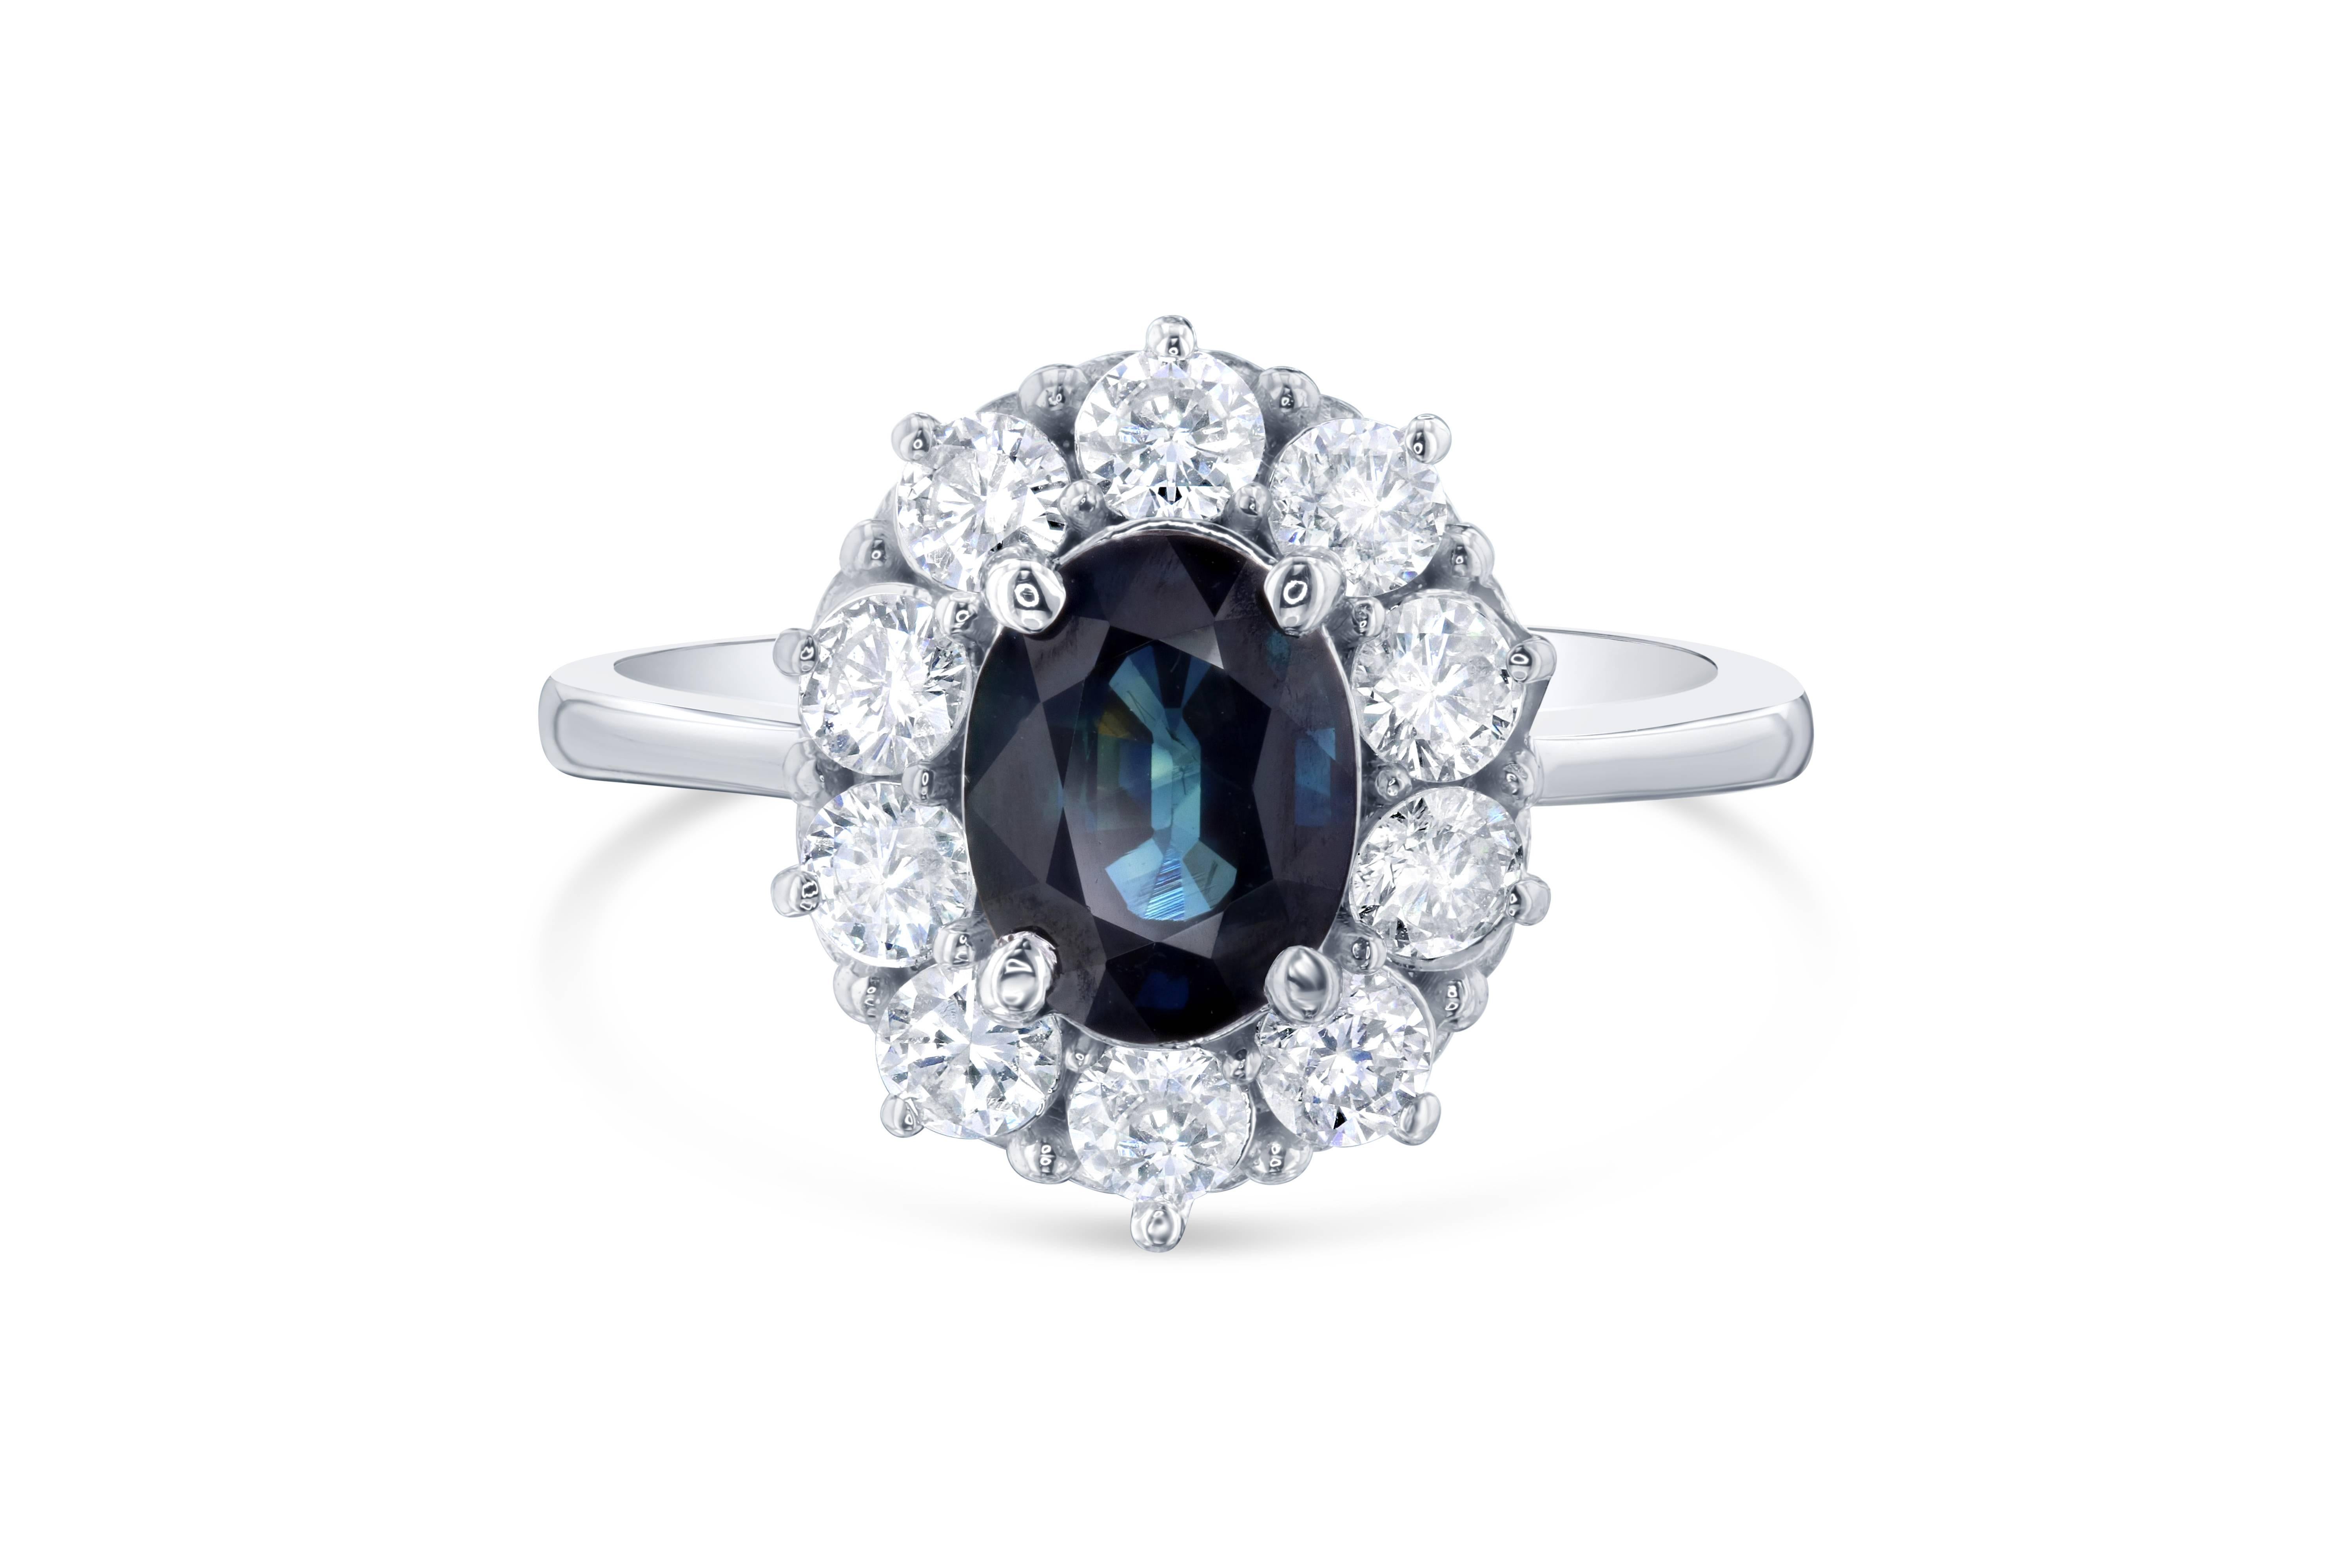 This ring is a classic beauty! The center is a 1.87 Carat Blue Sapphire surrounded by 10 Round Cut Diamonds weighing 0.87 Carats. It is set in 14K White Gold and is 4.0 grams. The Total Carat Weight of the ring is 2.74 Carats. The ring size is 7,